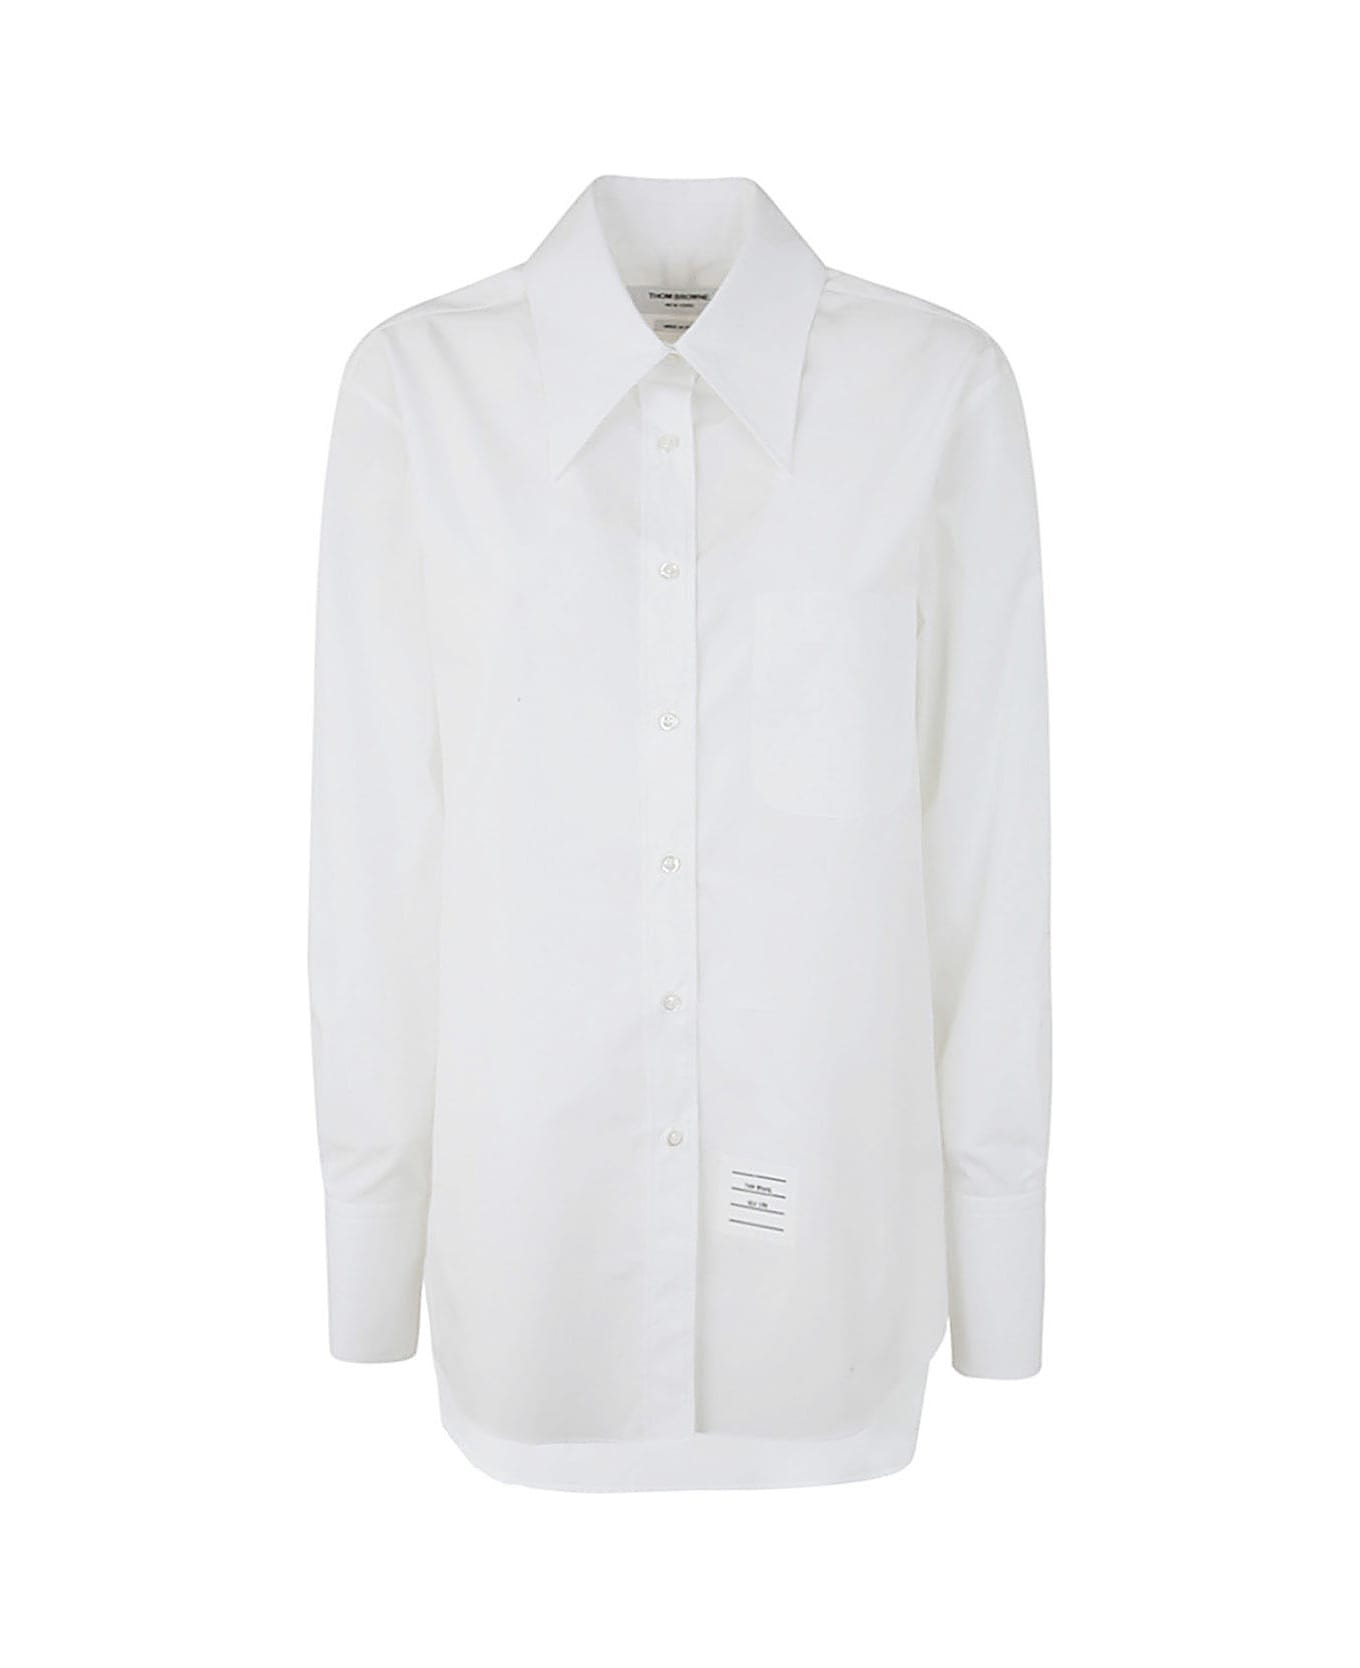 Thom Browne Exaggerated Easy Fit Point Collar Shirt In Poplin - White シャツ